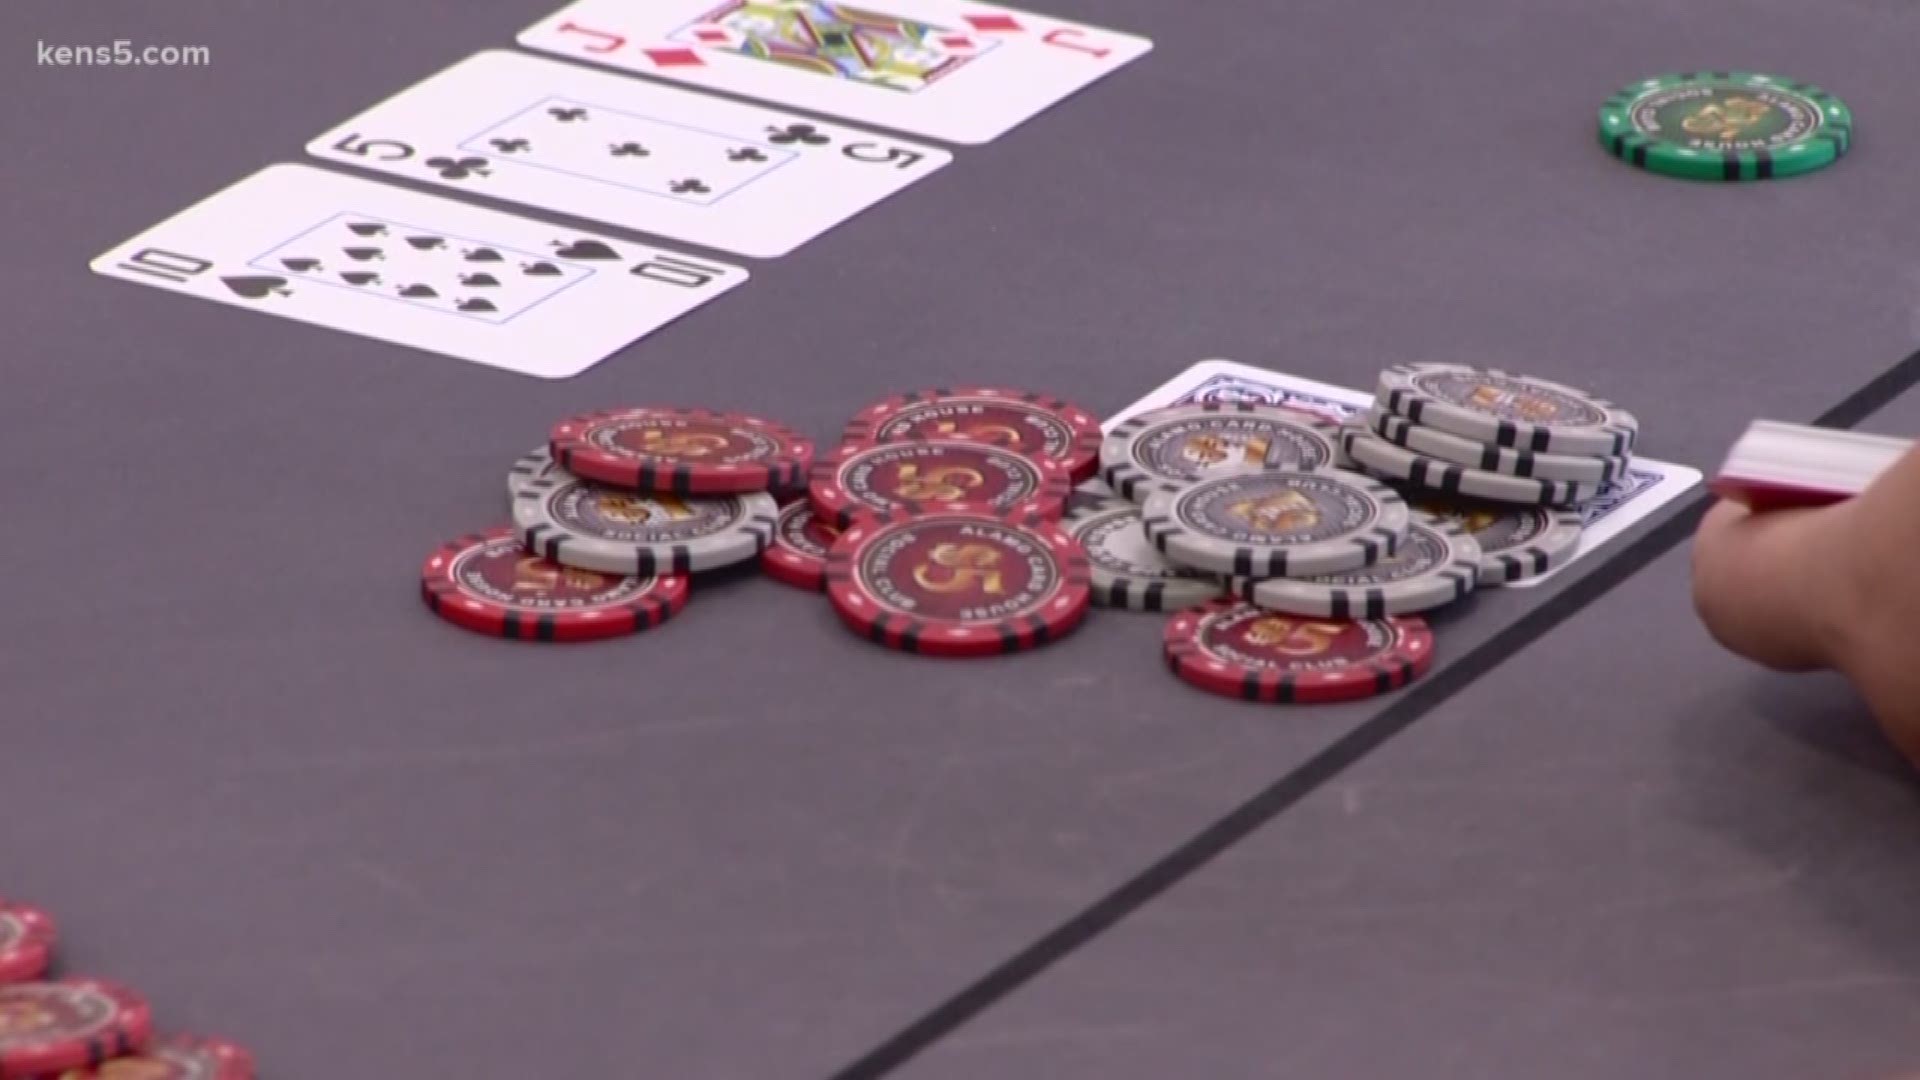 A new bill in the Lone Star State seeks to legalize casino gambling in certain Texas counties, including Bexar.